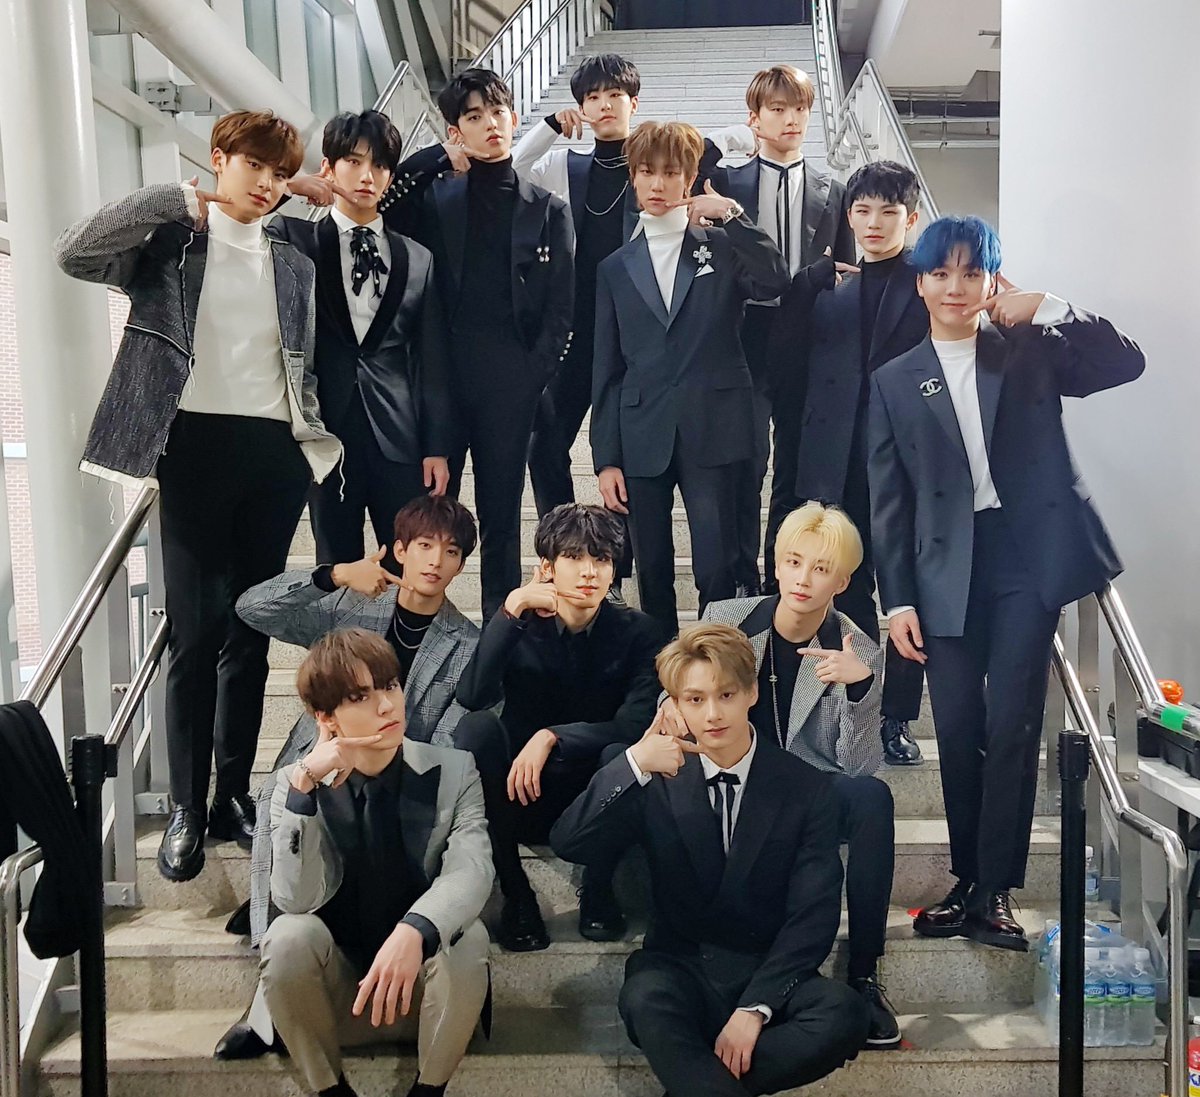 its ridiculous to ask for a forever, because there is no forever in this world, but for once, im asking for you to be our forever, and for us to be your forever.  #SEVENTEEN5thAnniversary  #SEVENTEEN  #우리의청춘_세븐틴_5주년_축하해  #세븐틴  @pledis_17